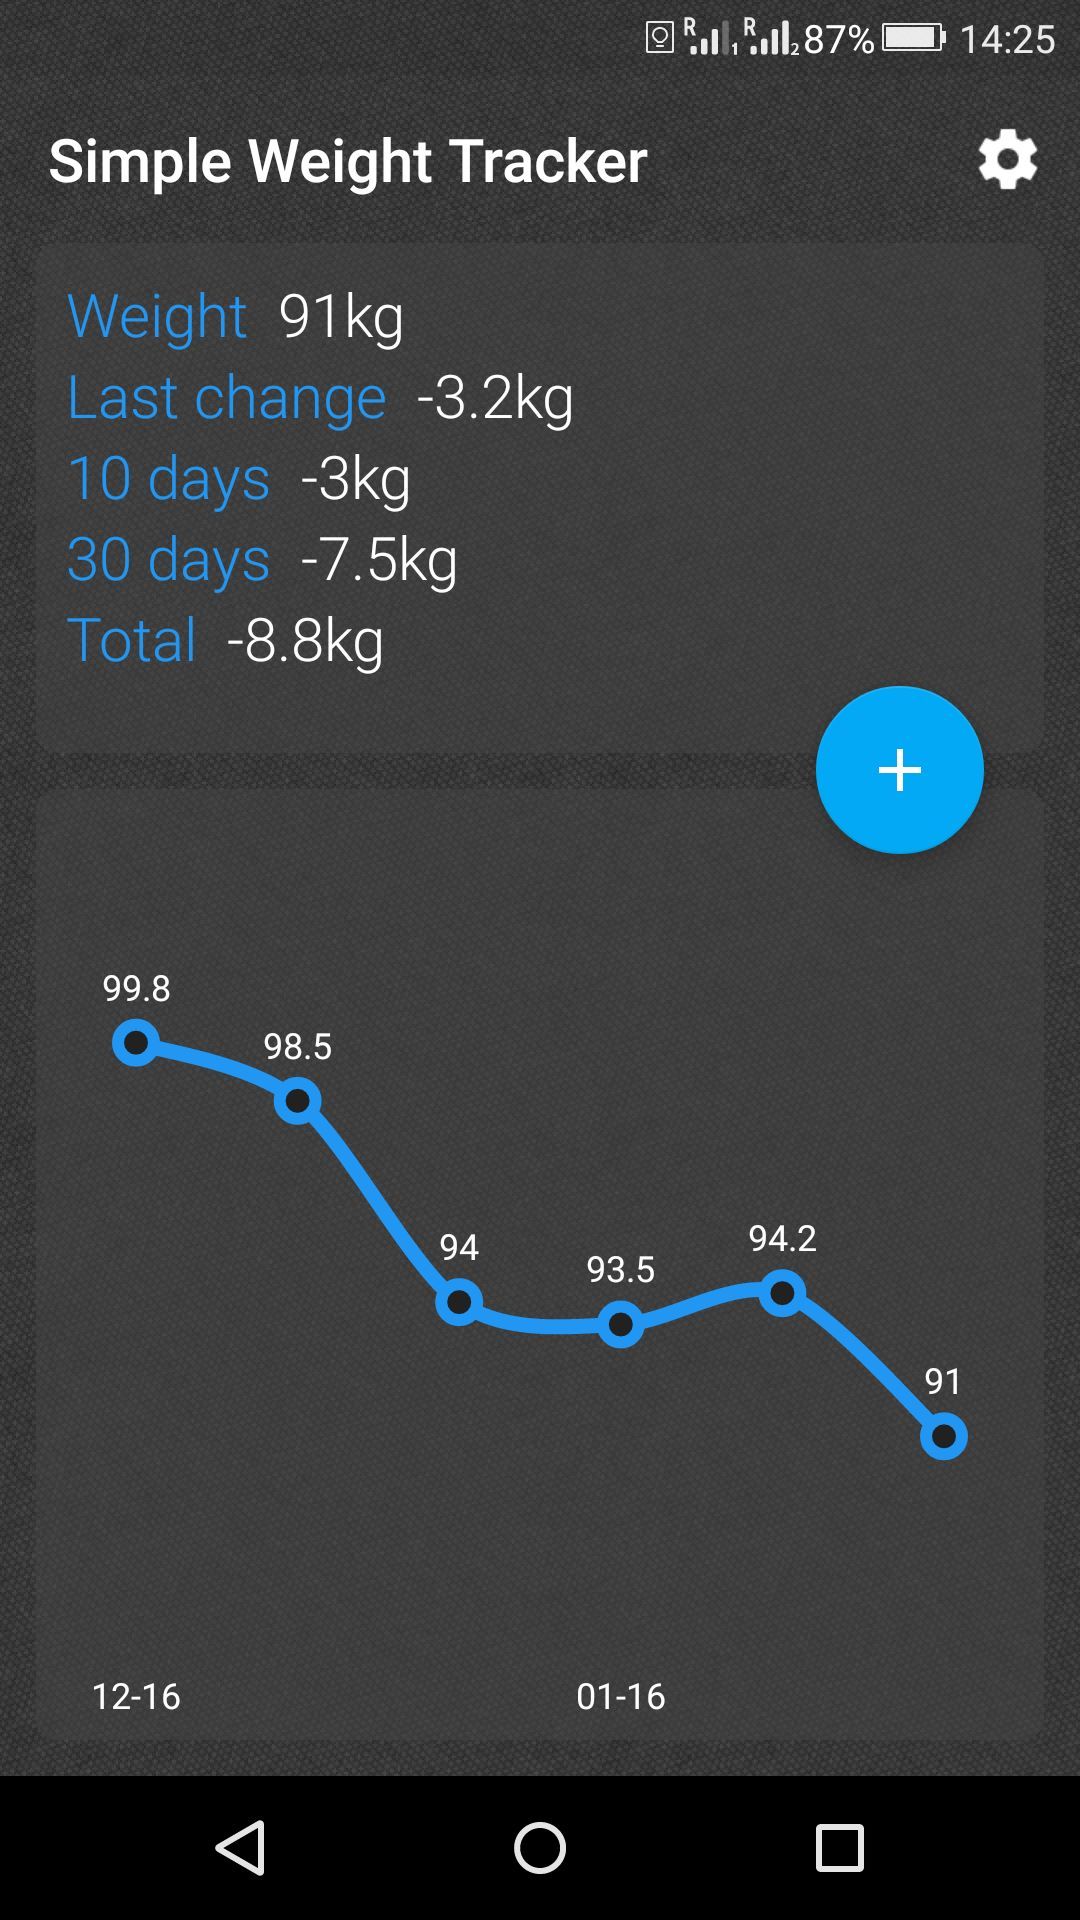 Simple Weight Tracker